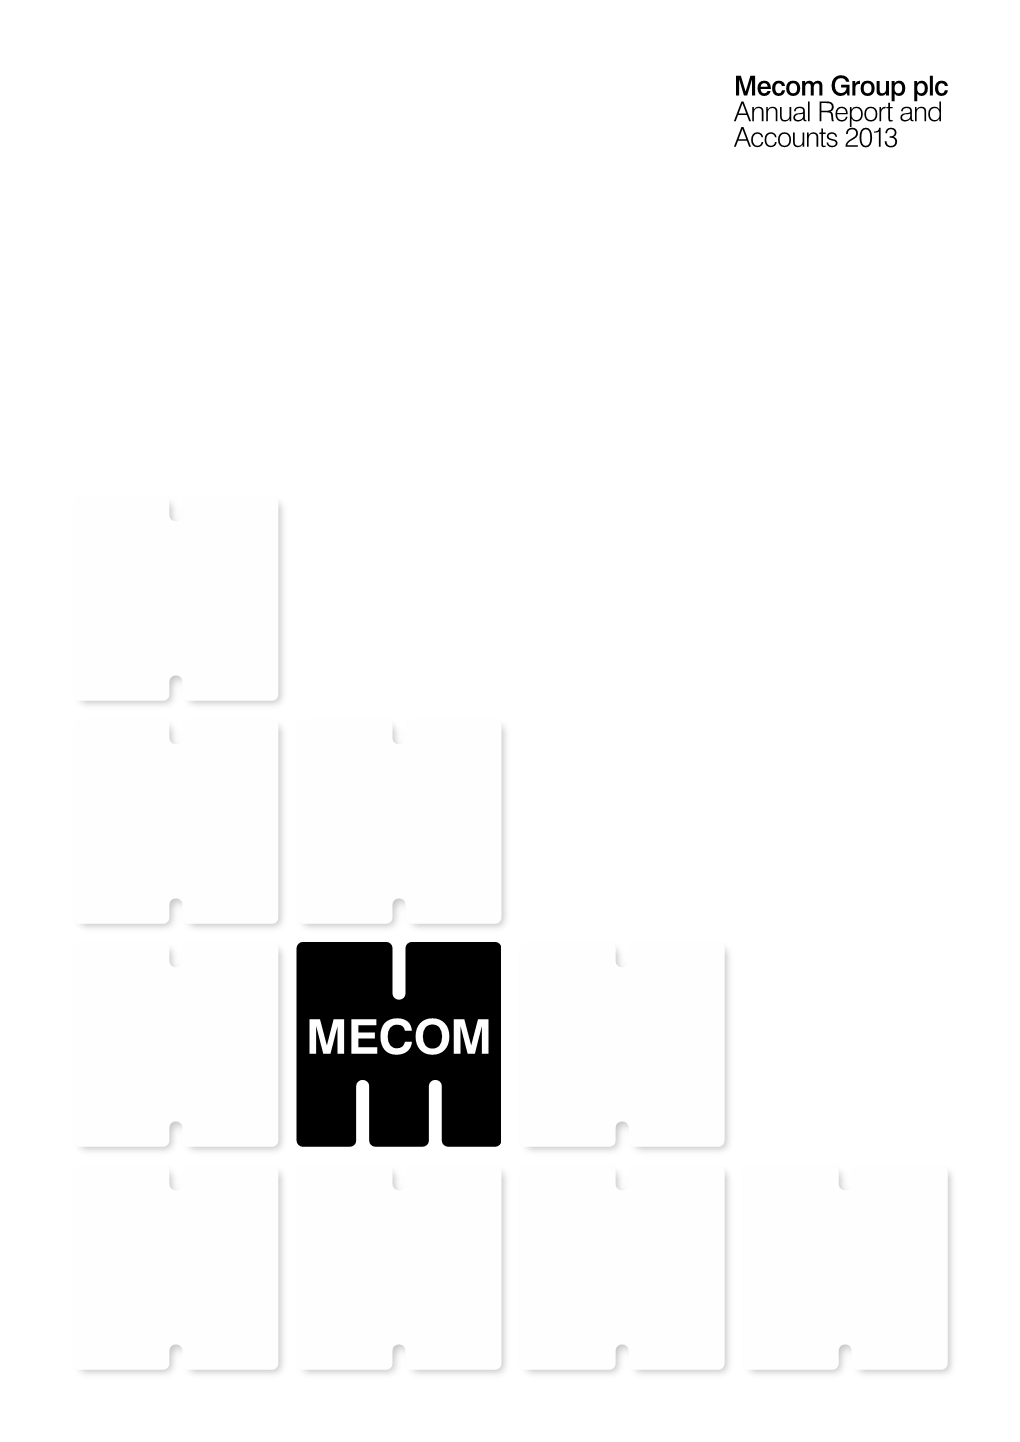 Mecom Group Plc Annual Report and Accounts 2013